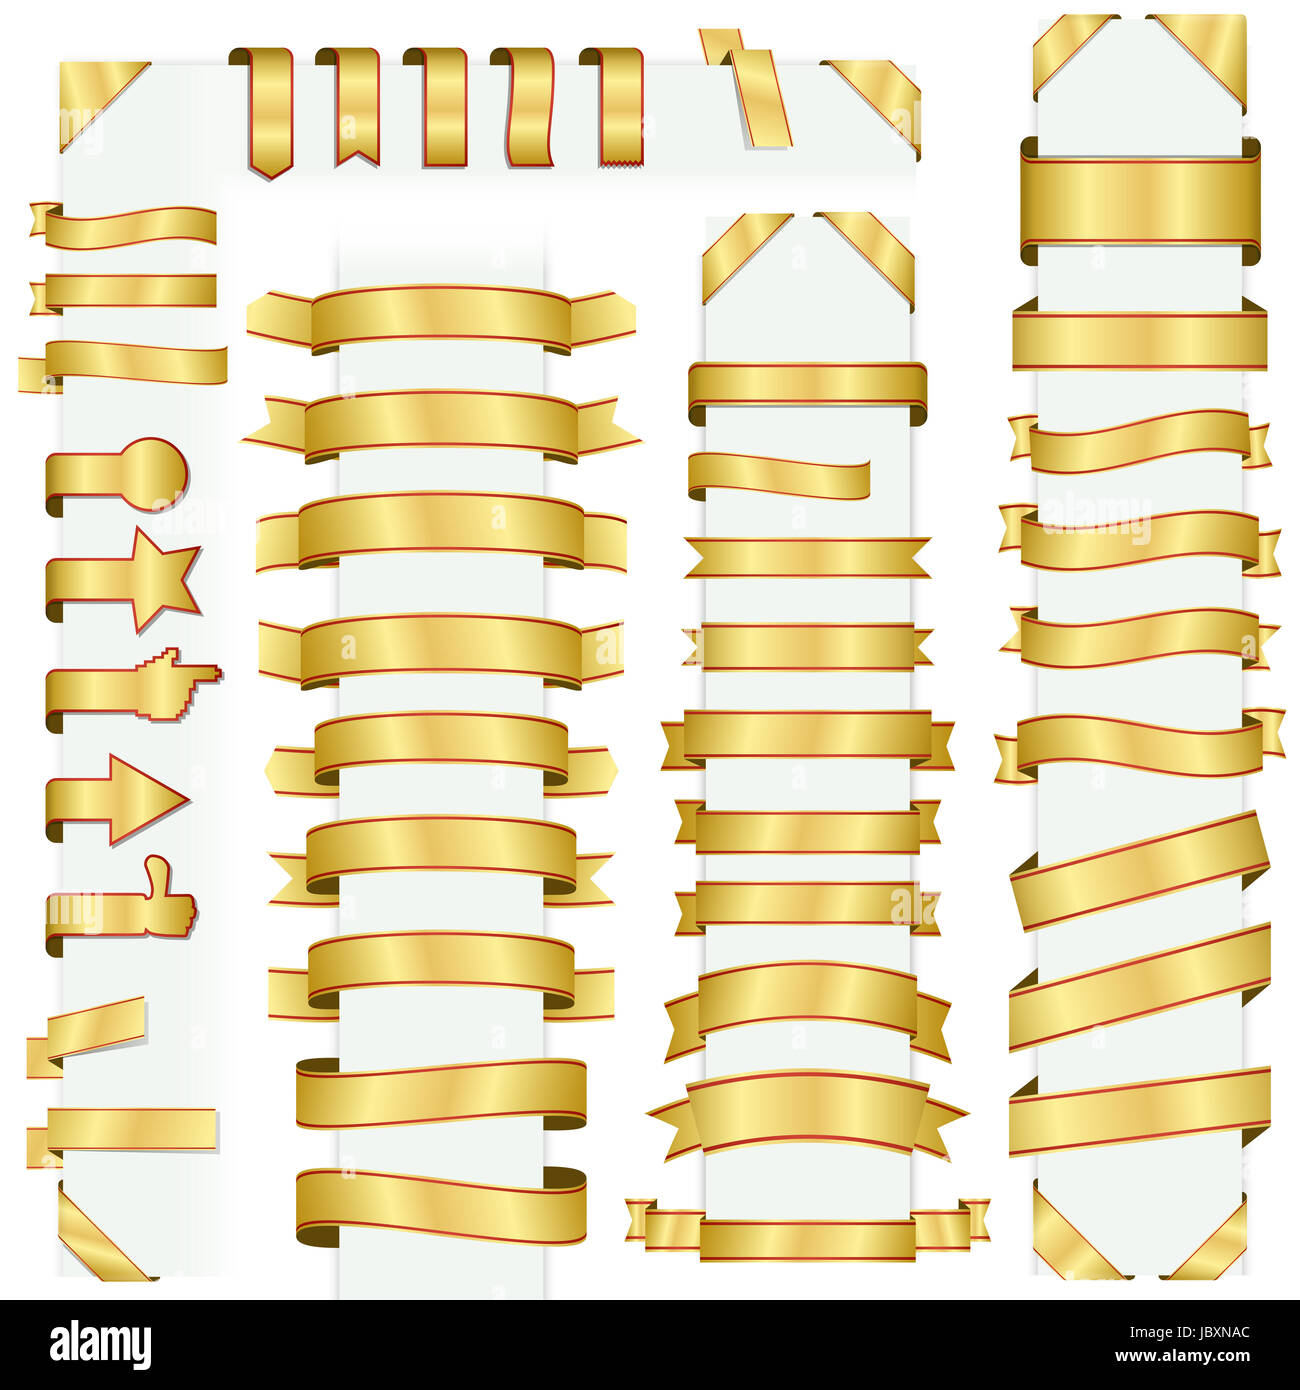 big collection of design retro banners gold Stock Photo